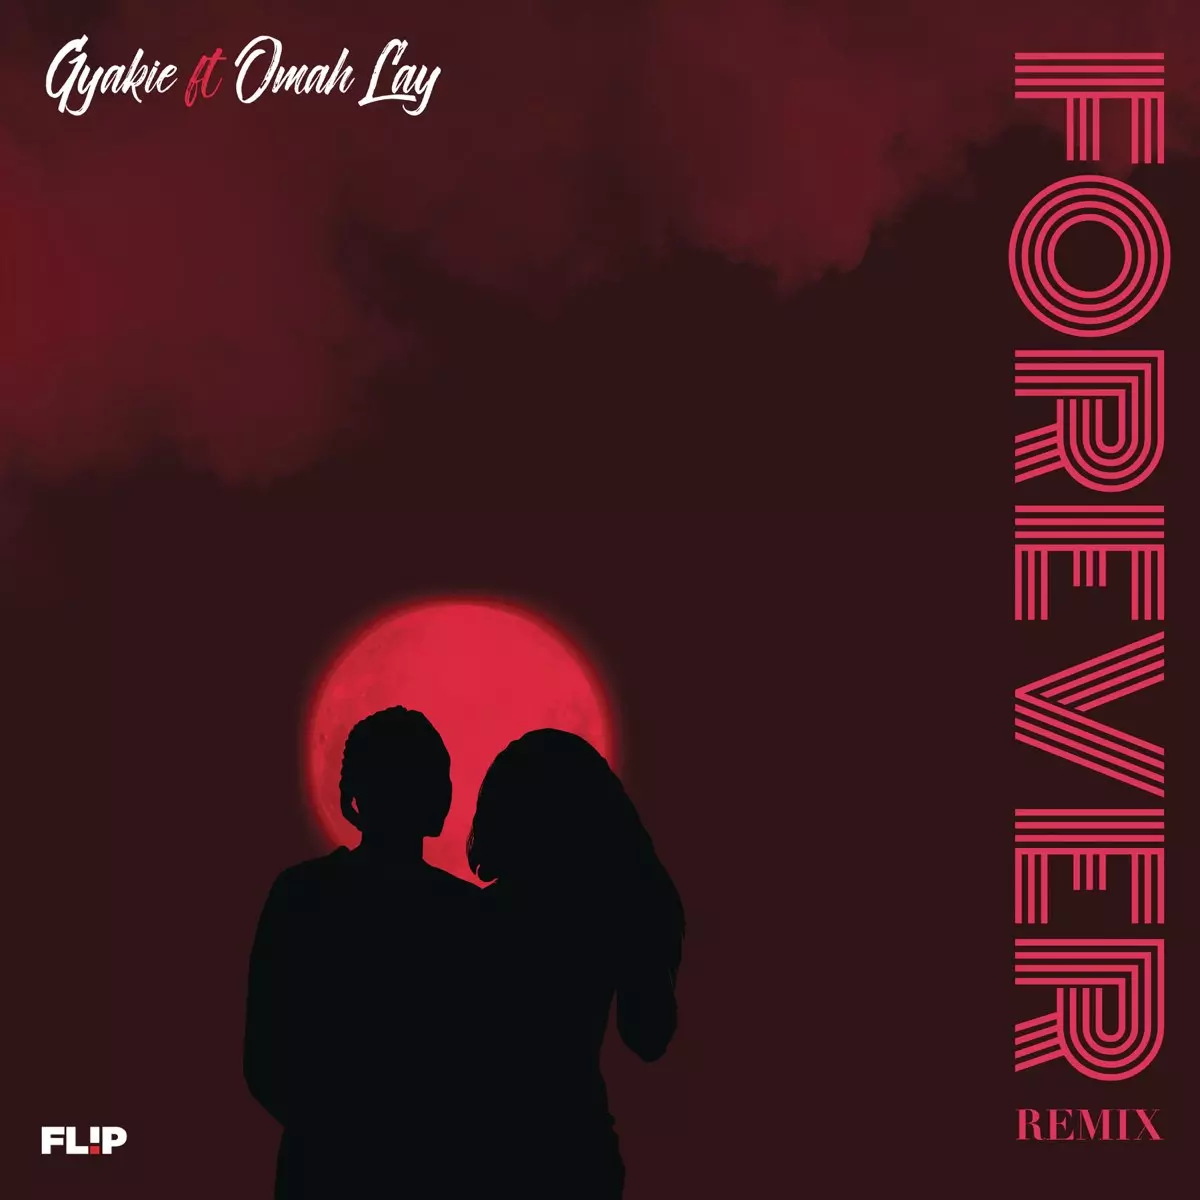 Forever (Remix) by Gyakie & Omah Lay on Apple Music